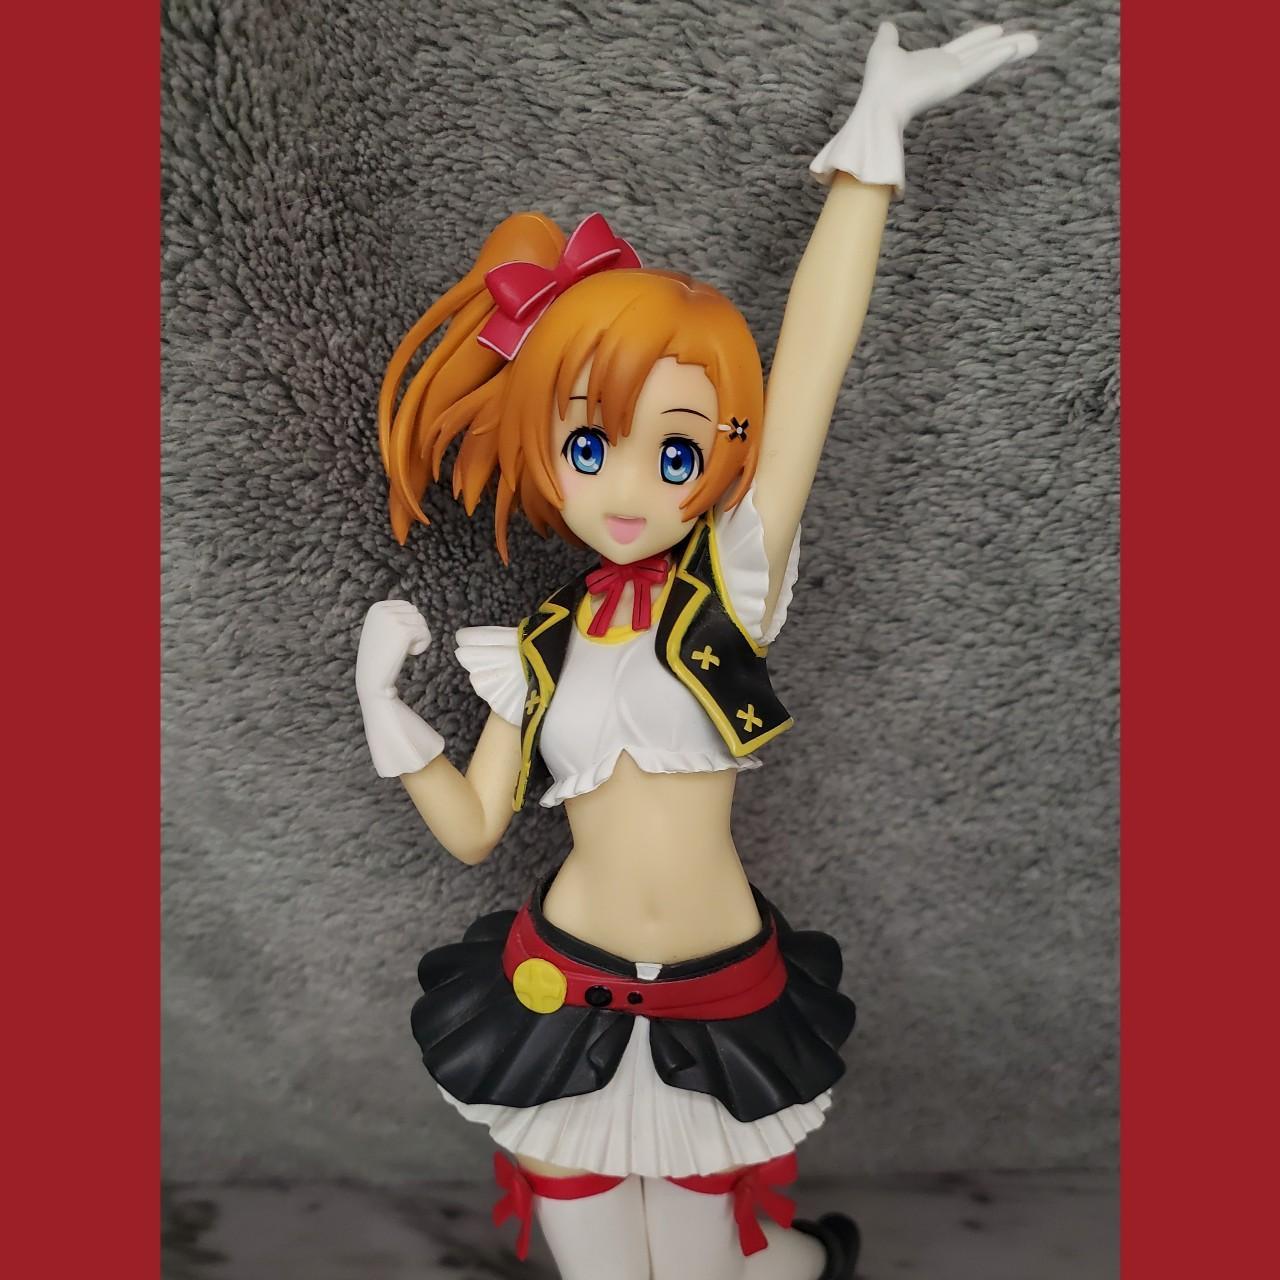 This is an offer made on the Request: anime figures